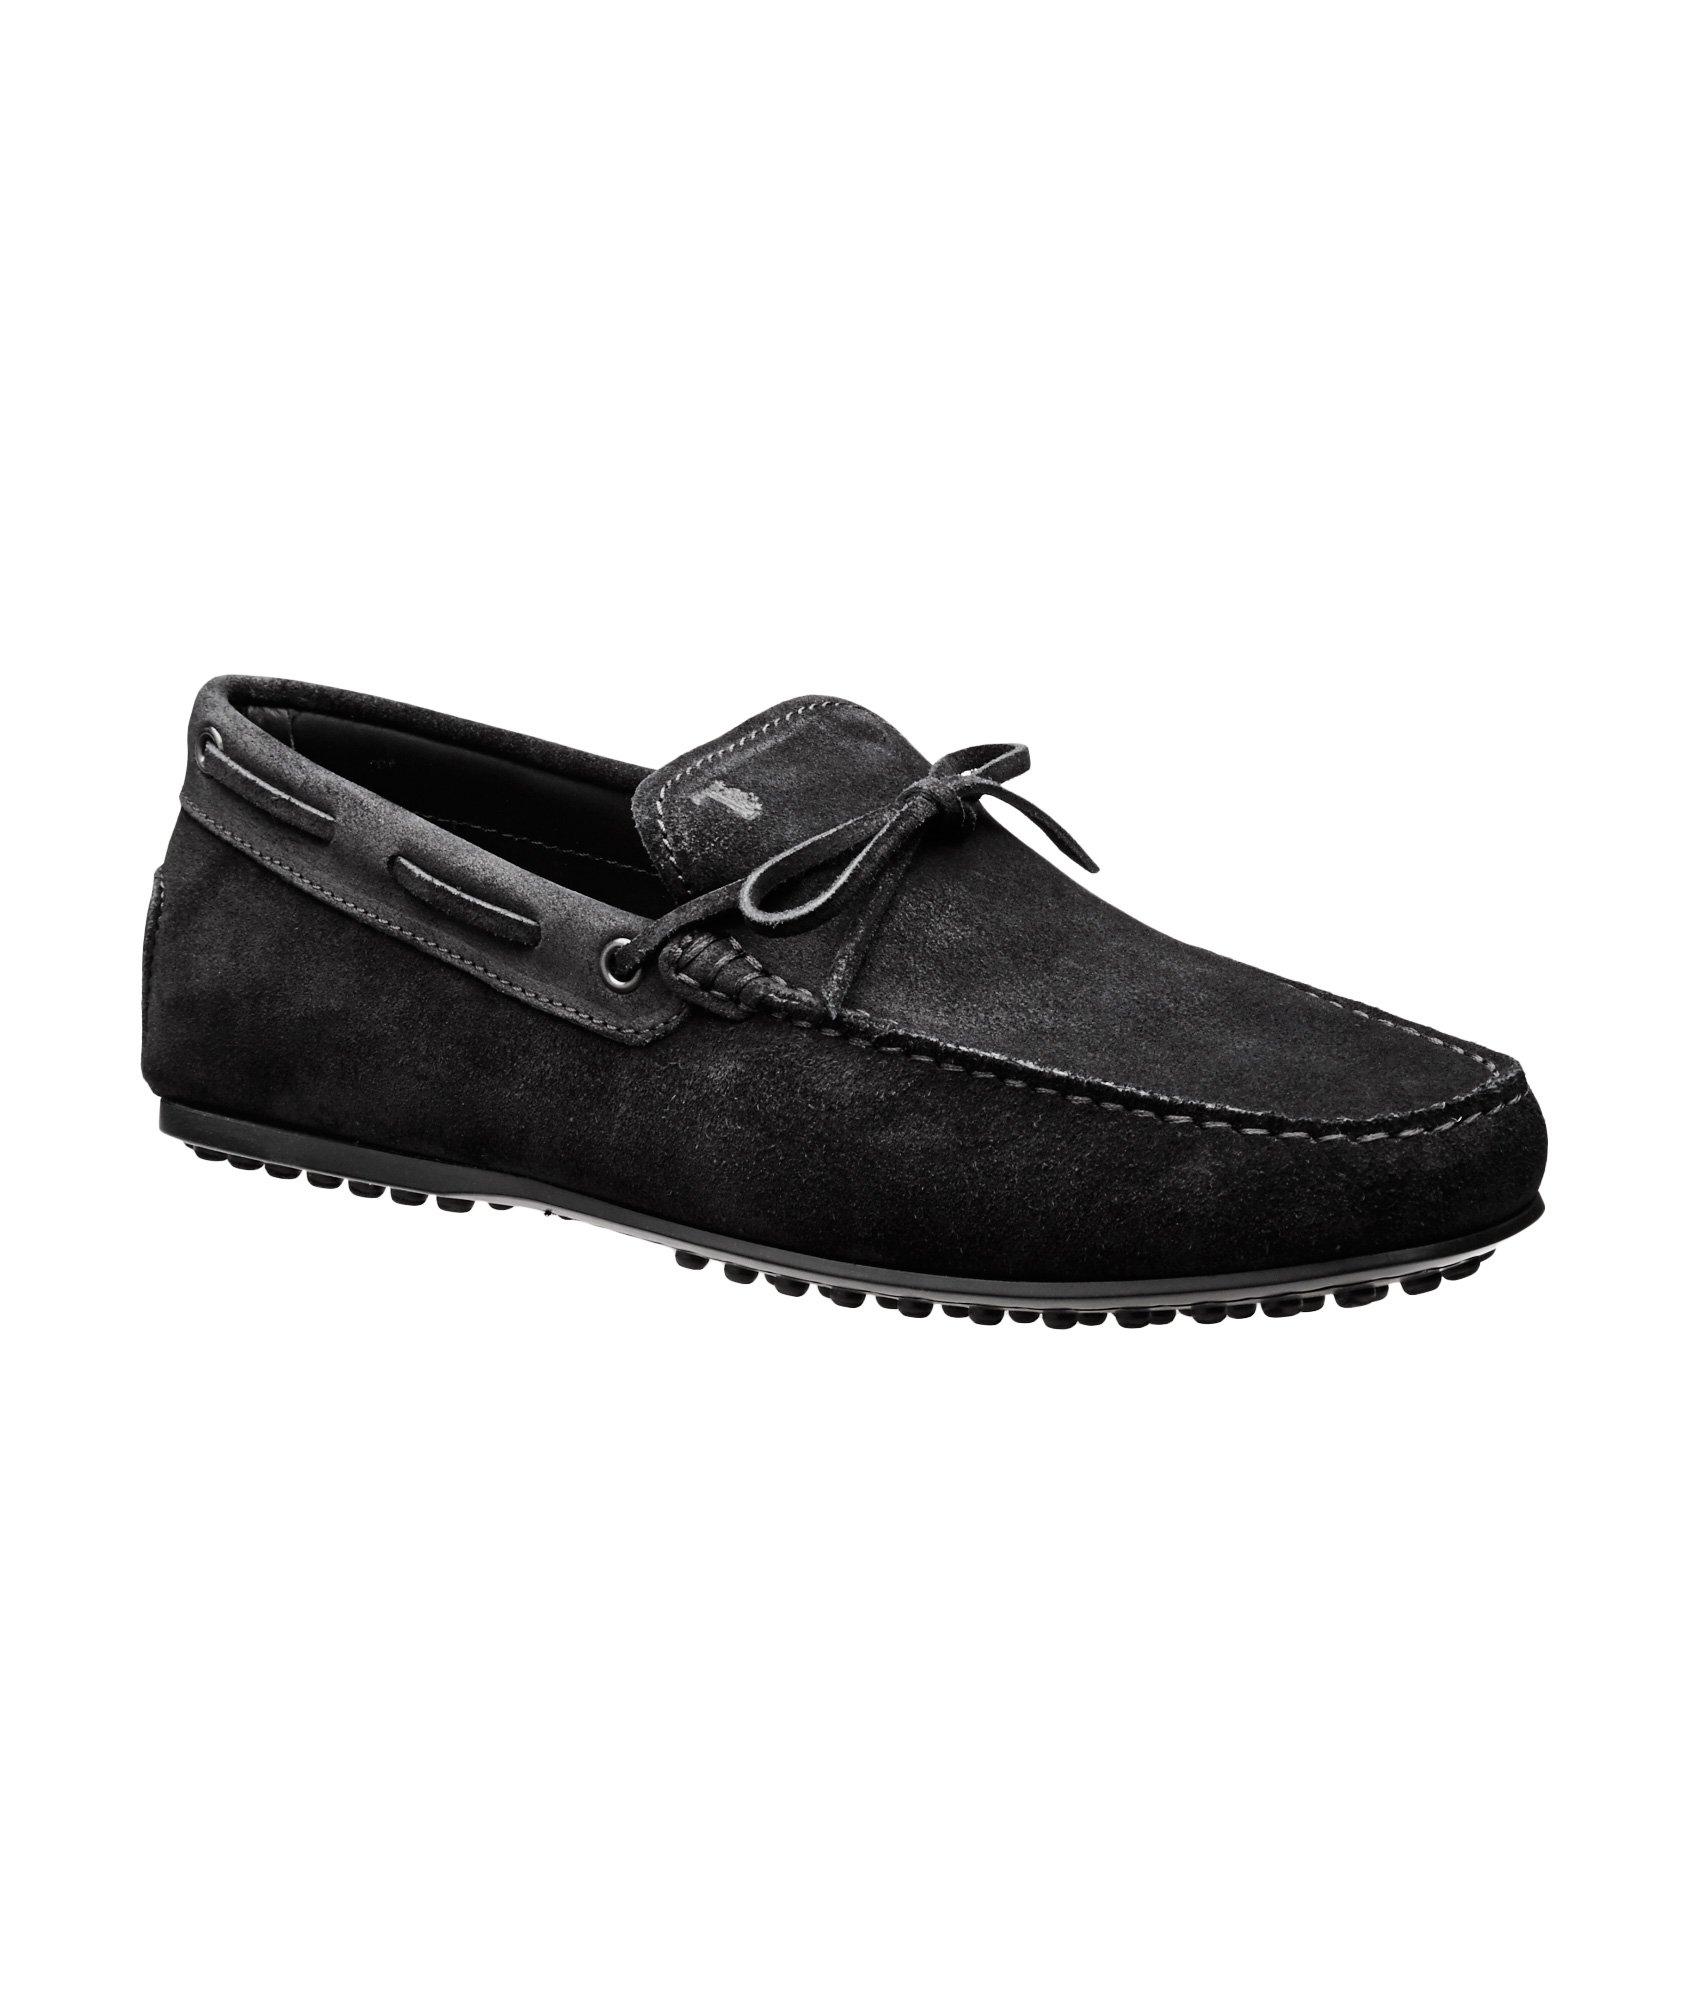 Suede City Gimmino Moccasins image 0